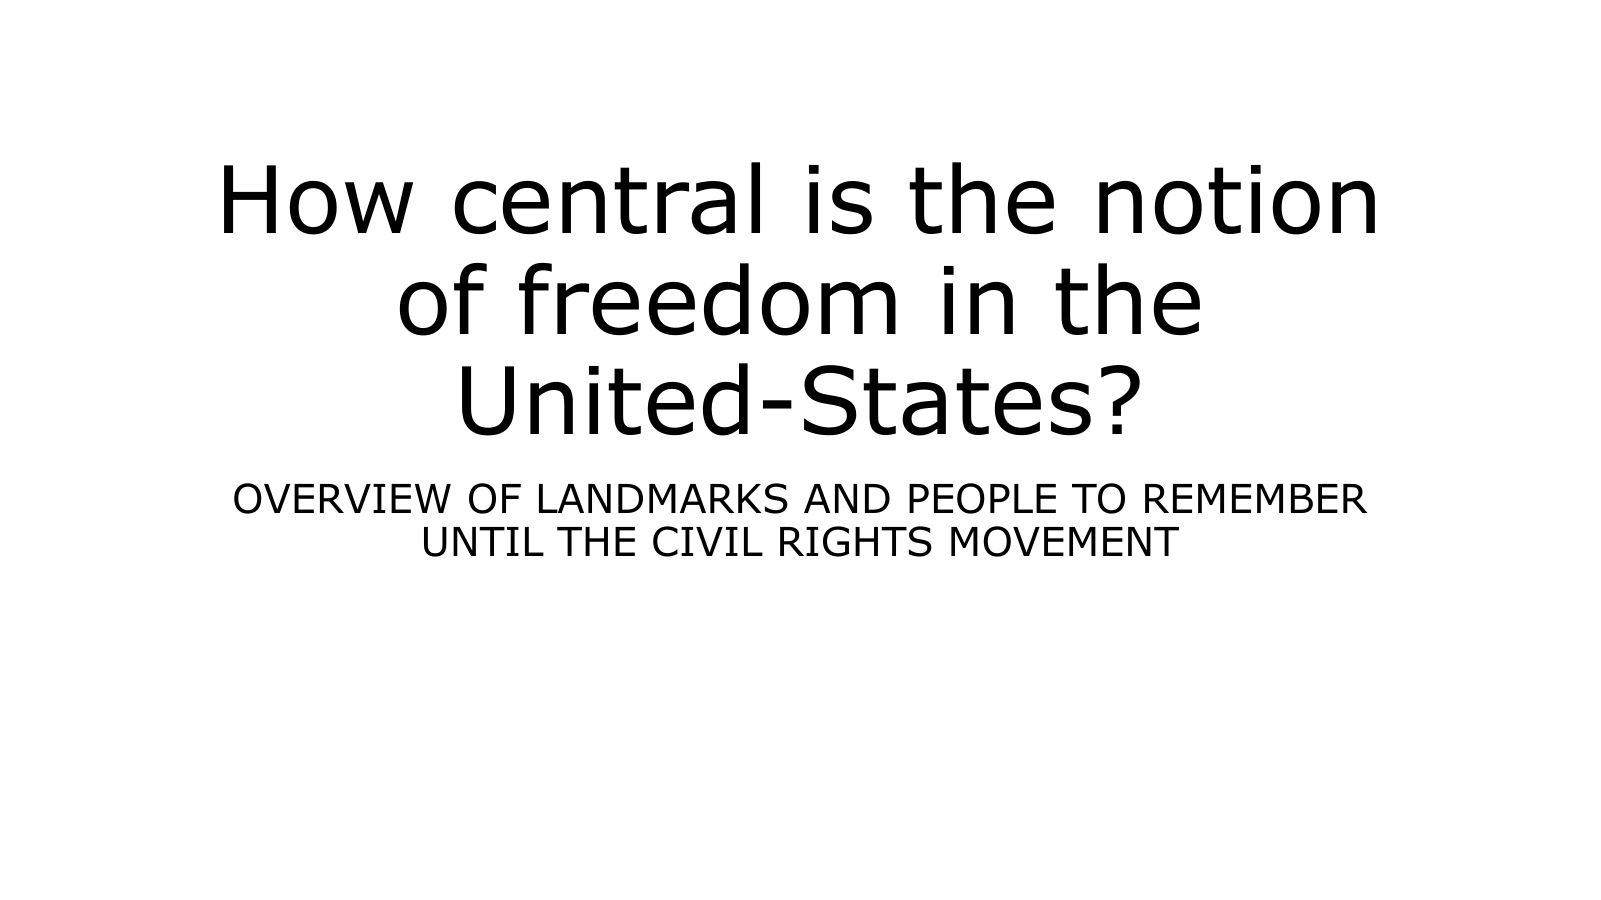 Prévisualisation du document How central is the notion of freedom in the United-States?